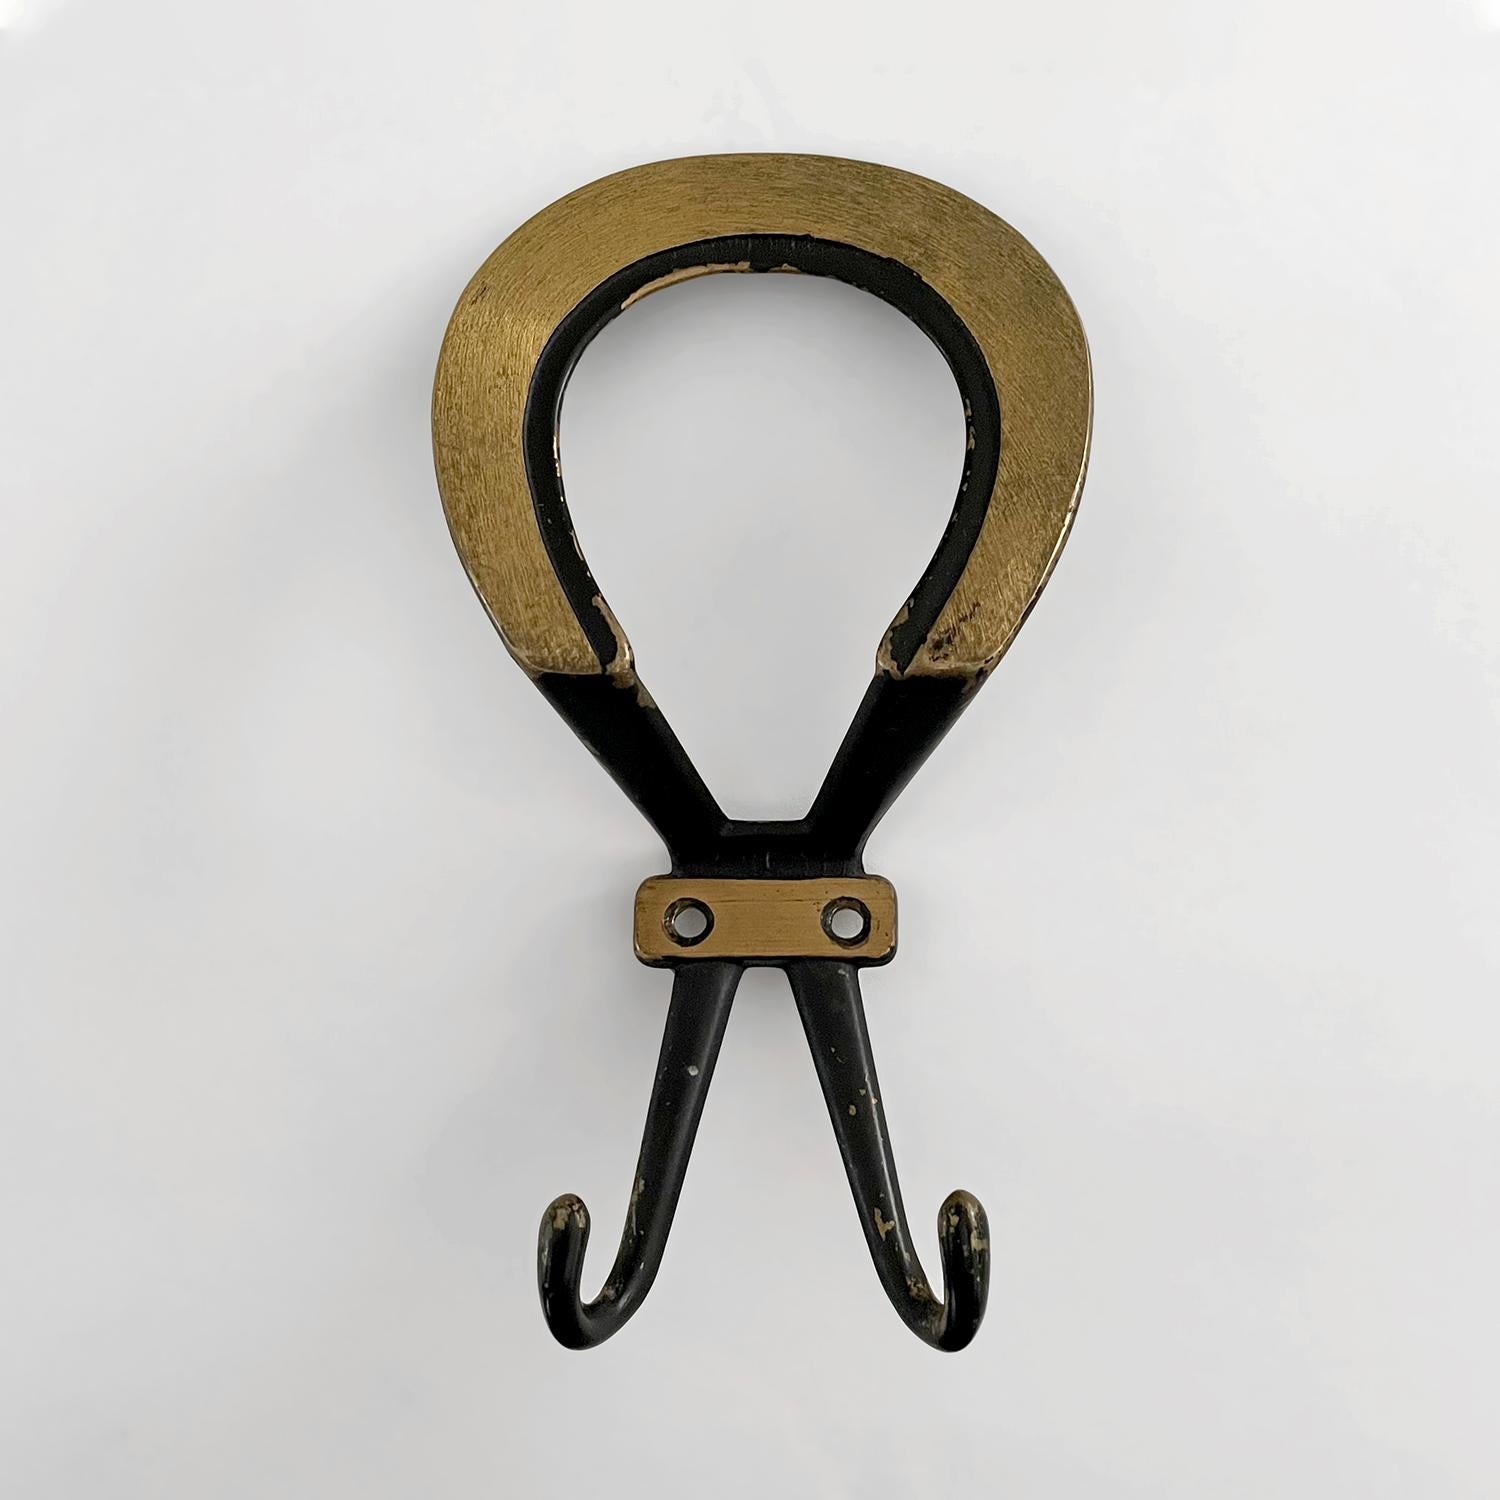 20th Century French Gold Leaf & Iron Loop Wall Coat Hooks - 4 available  For Sale